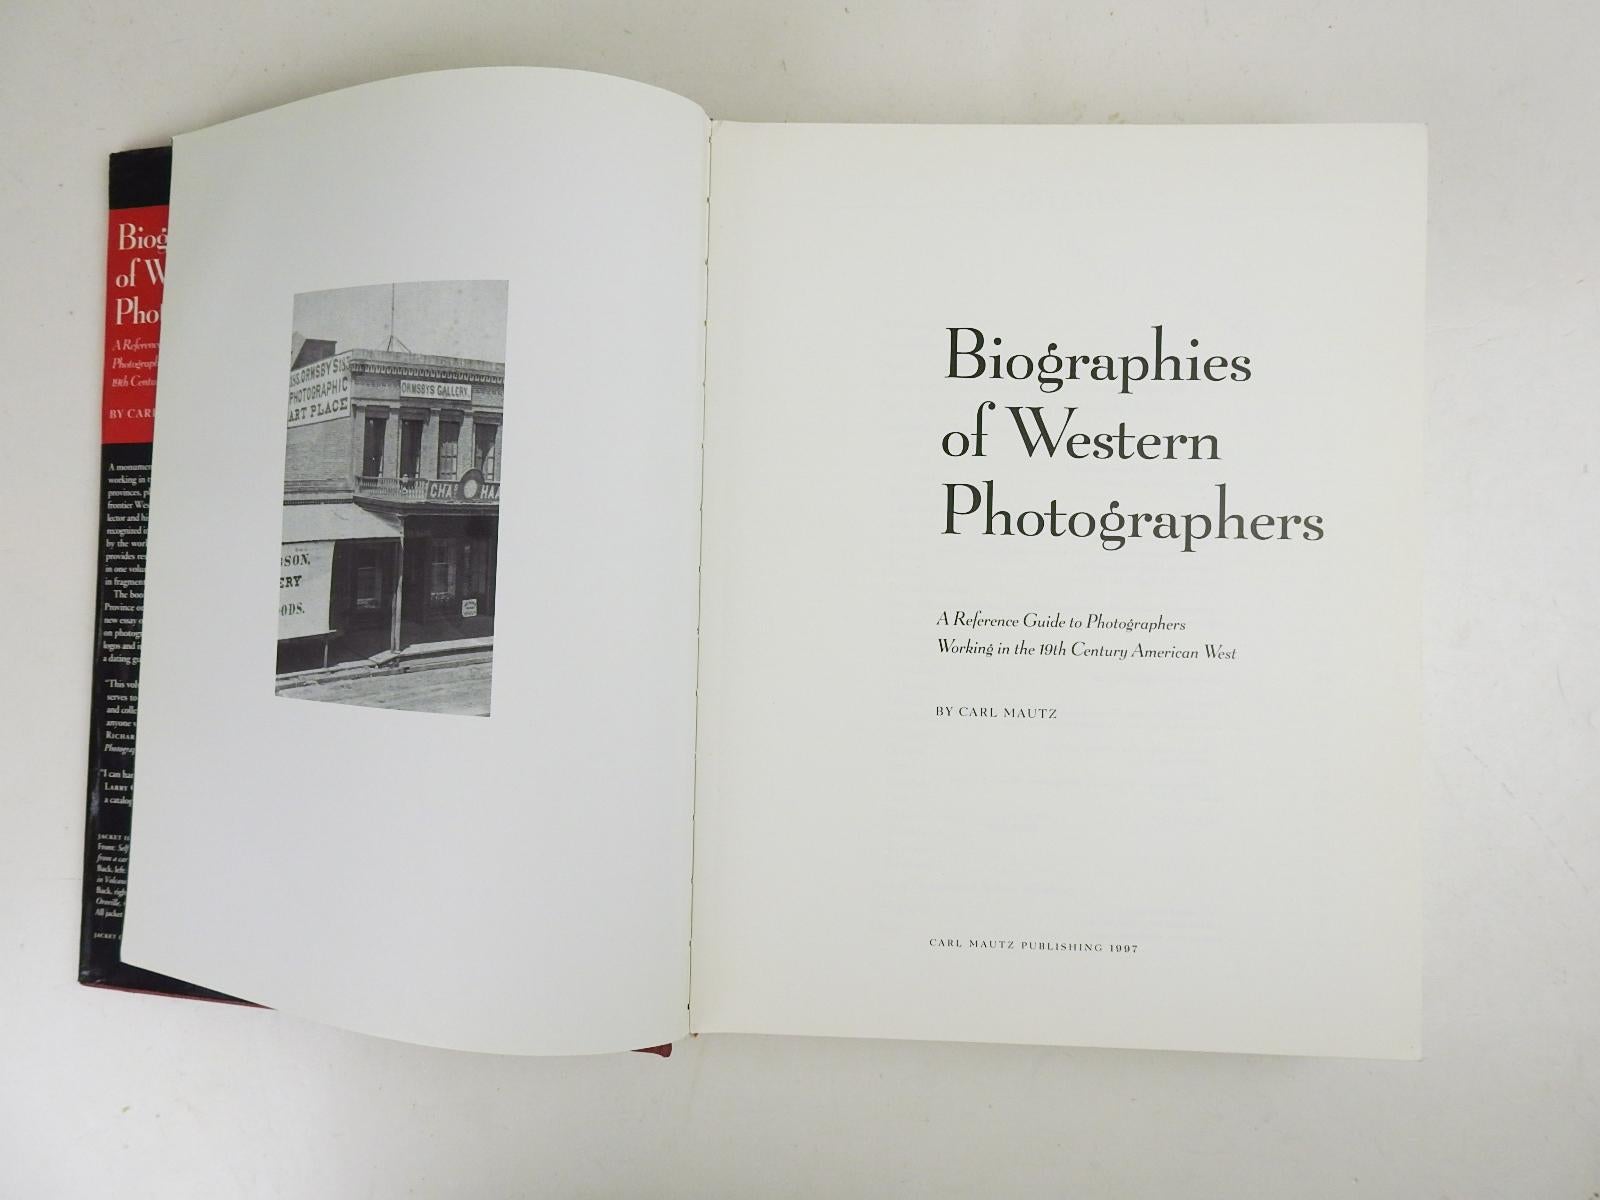 Biographies of Western Photographers 1840-1900 by Carl Mautz.  Published by Carl Mautz Nevada City California, 1997.  Red cloth hardcover binding, illustrated dust jacket, edge wear to dust jacket.